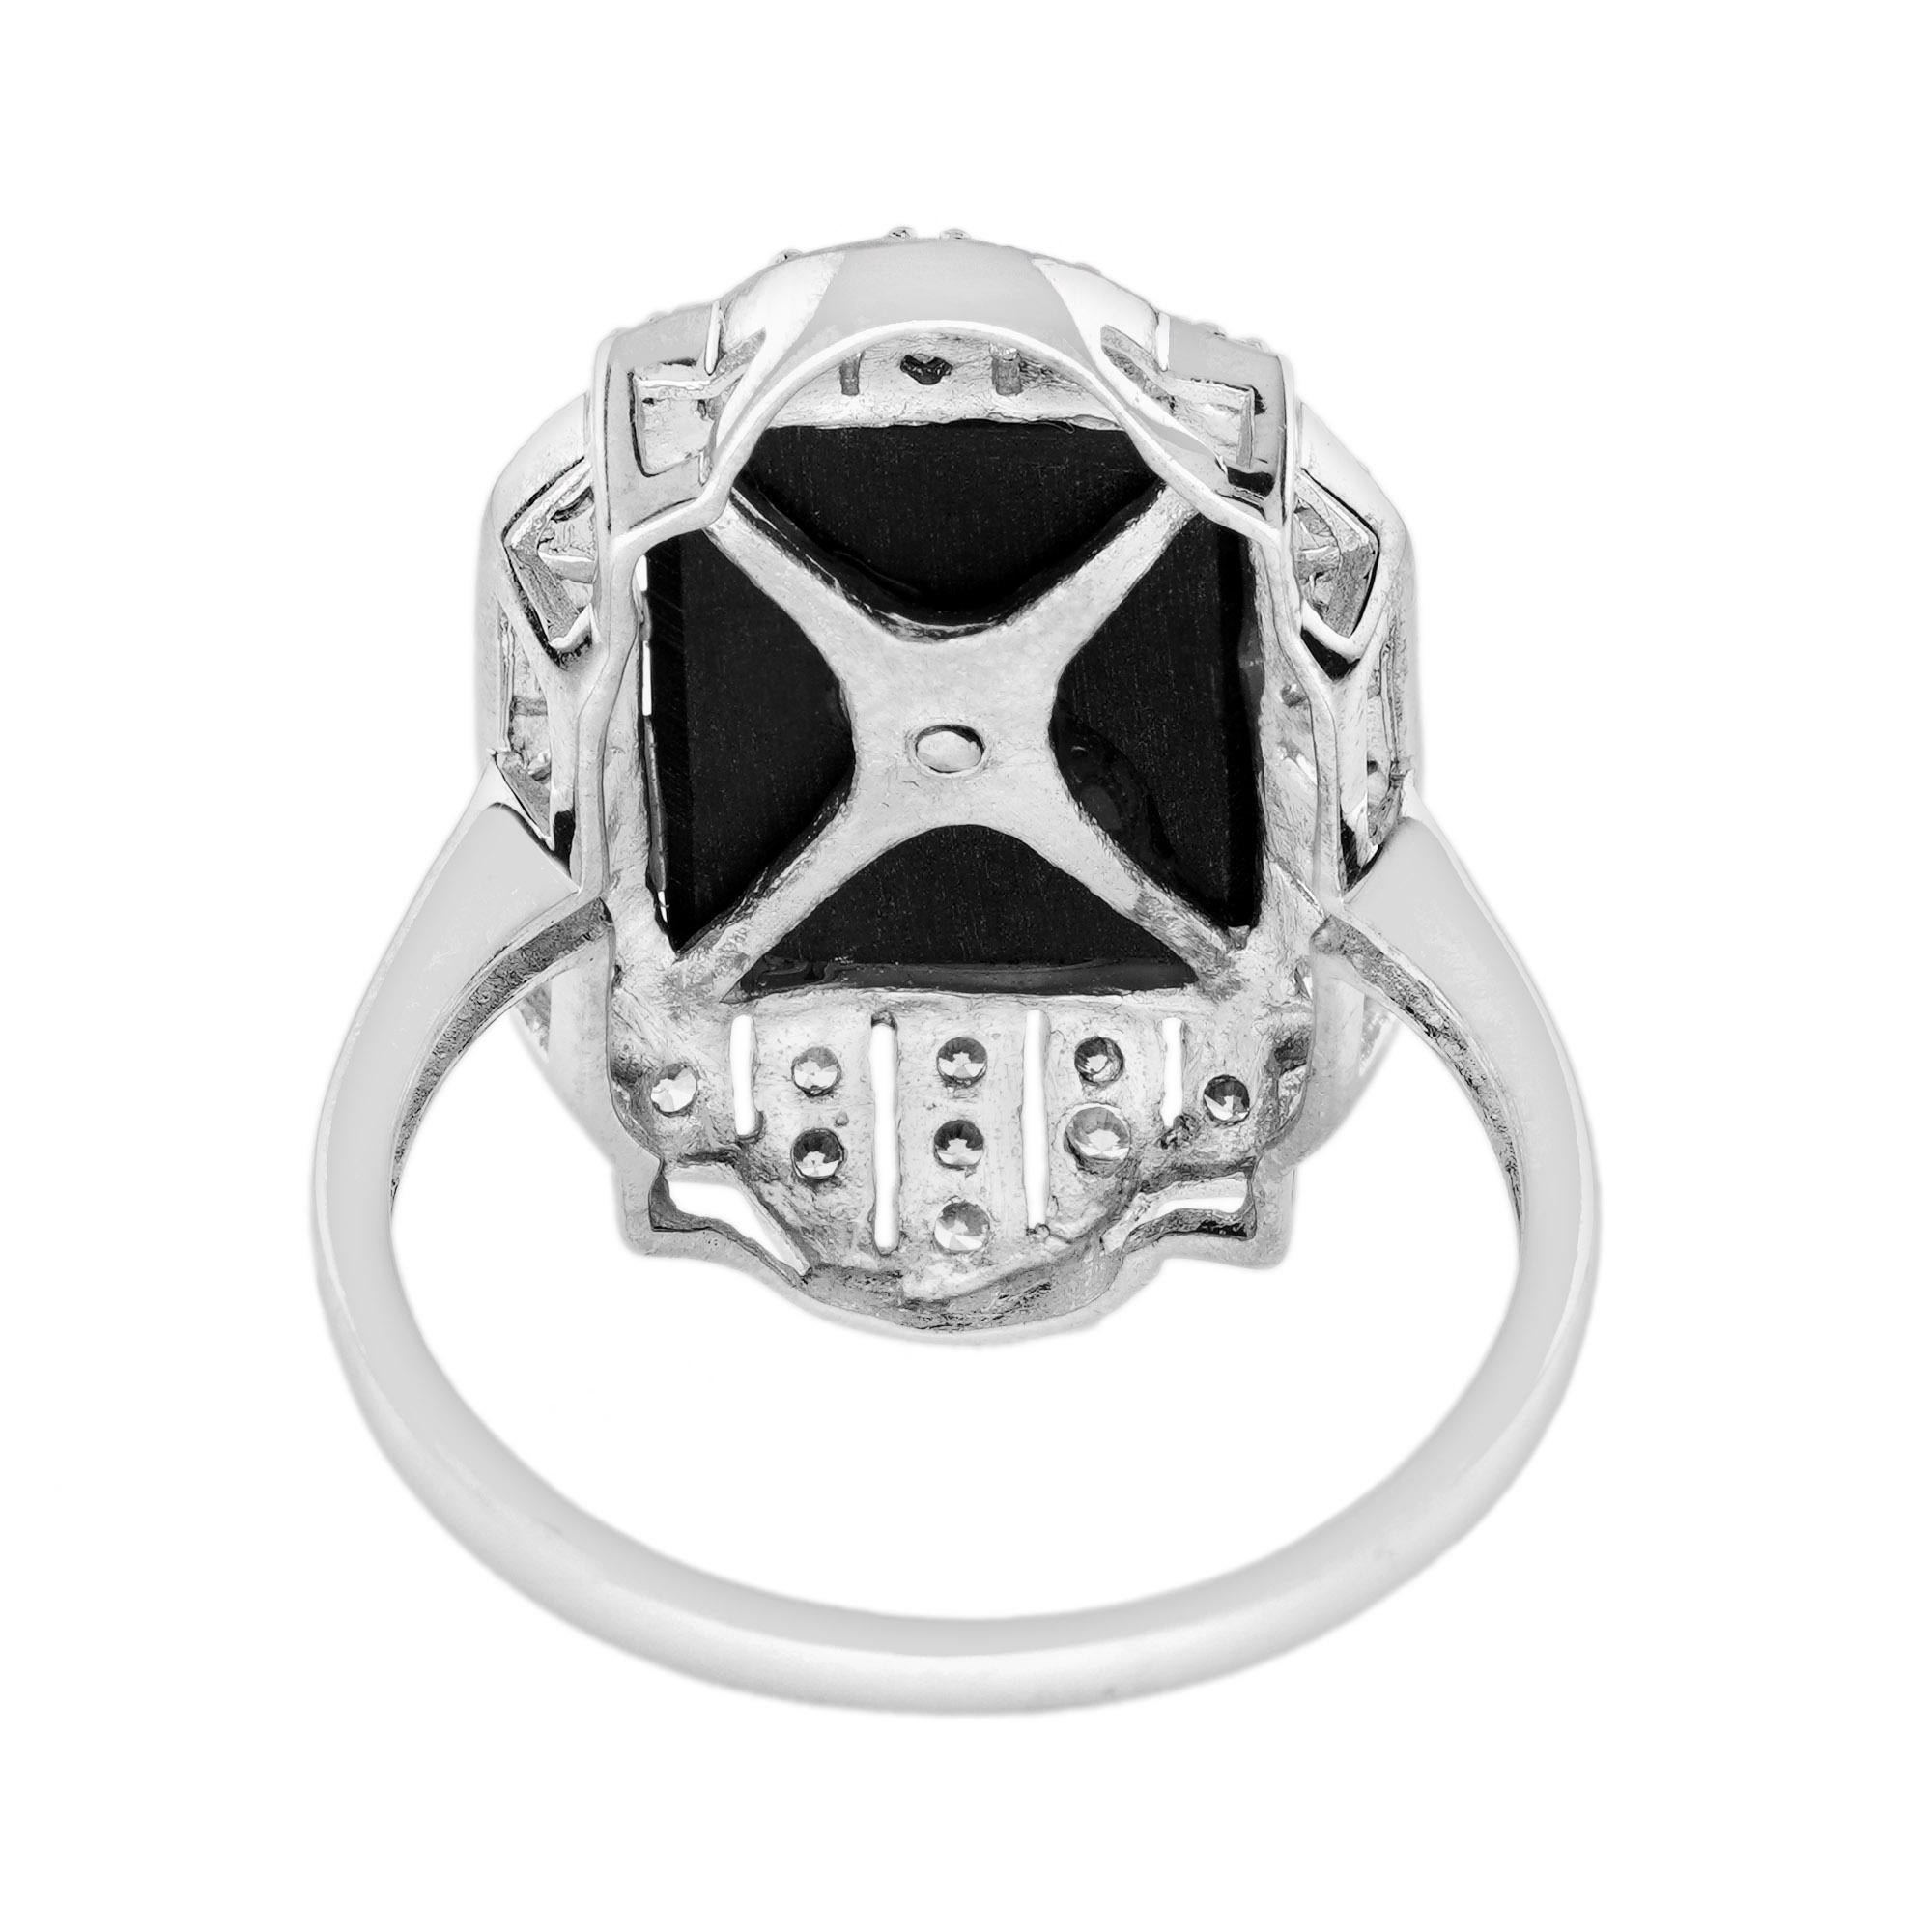 For Sale:  Diamond and Onyx Art Deco Style Dinner Ring in 14K White Gold 5